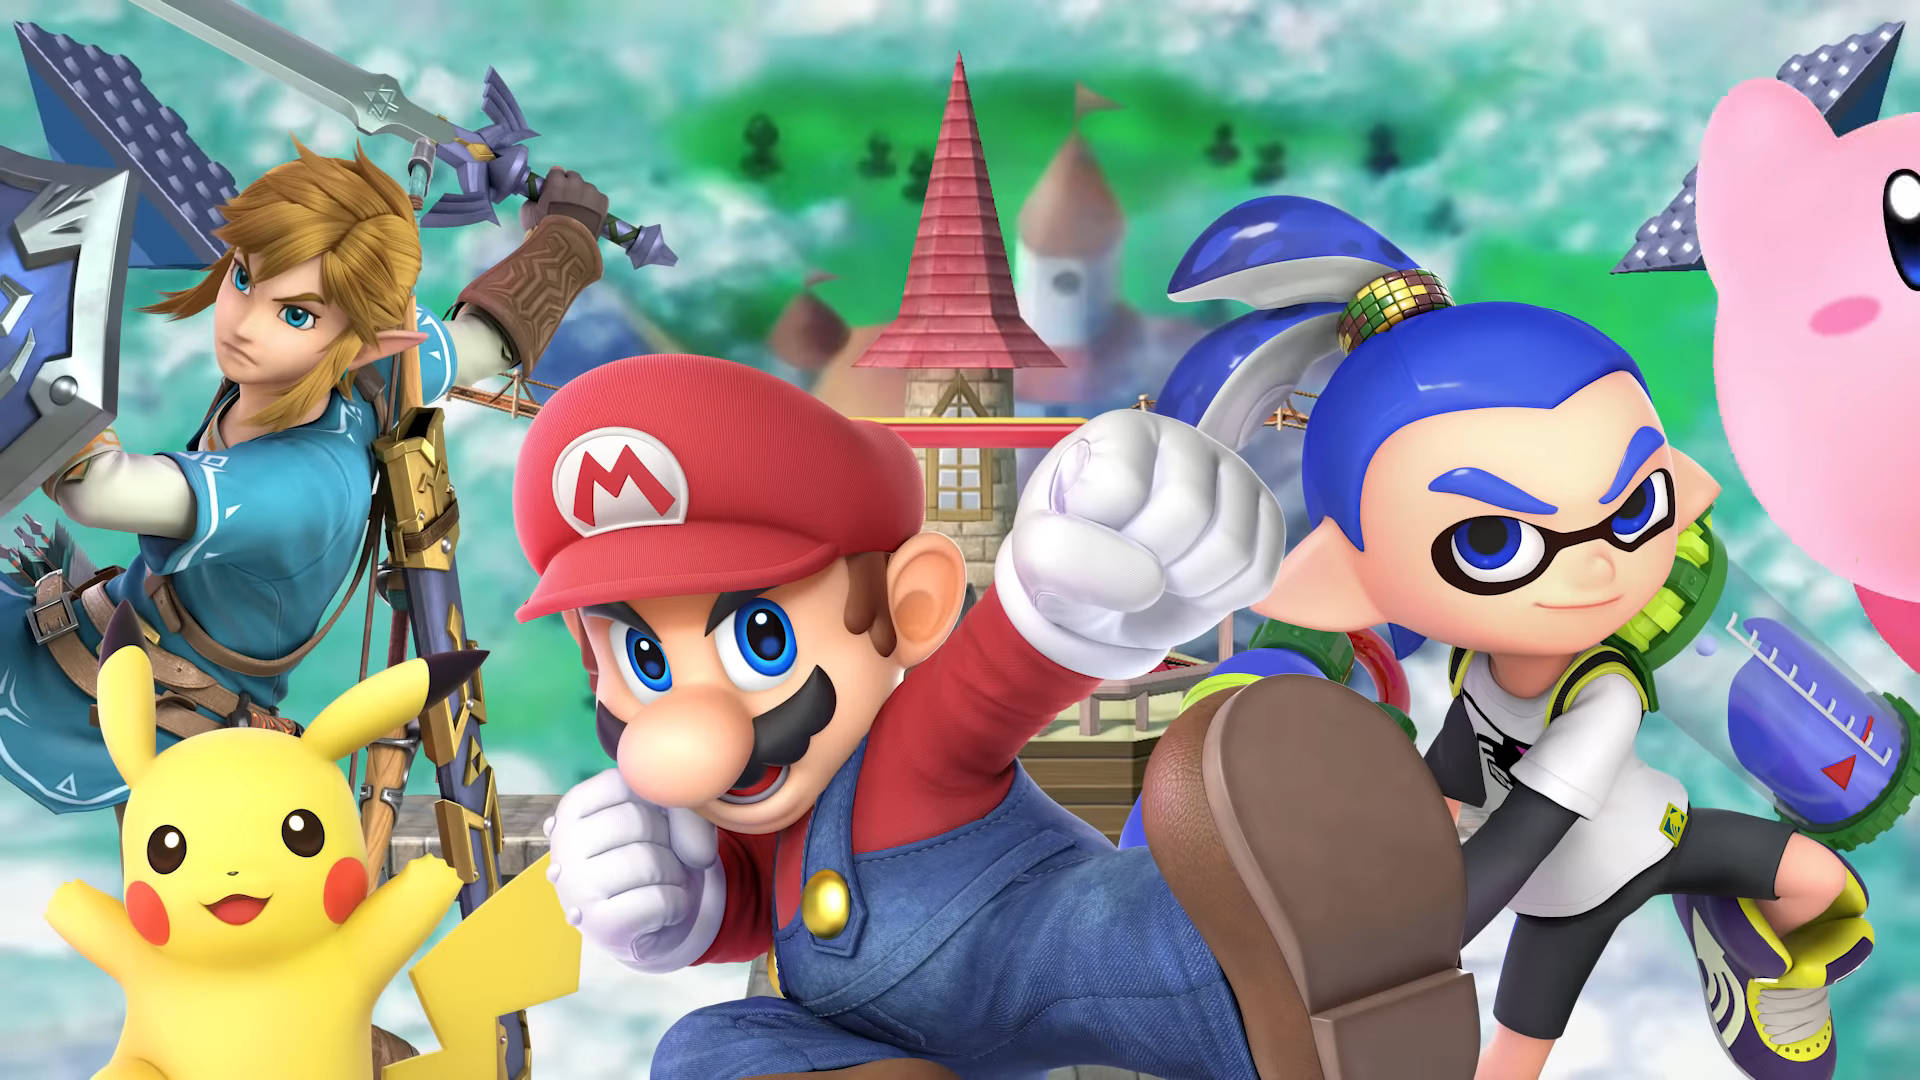 Super Smash Bros Ultimate 1920X1080 Wallpaper and Background Image